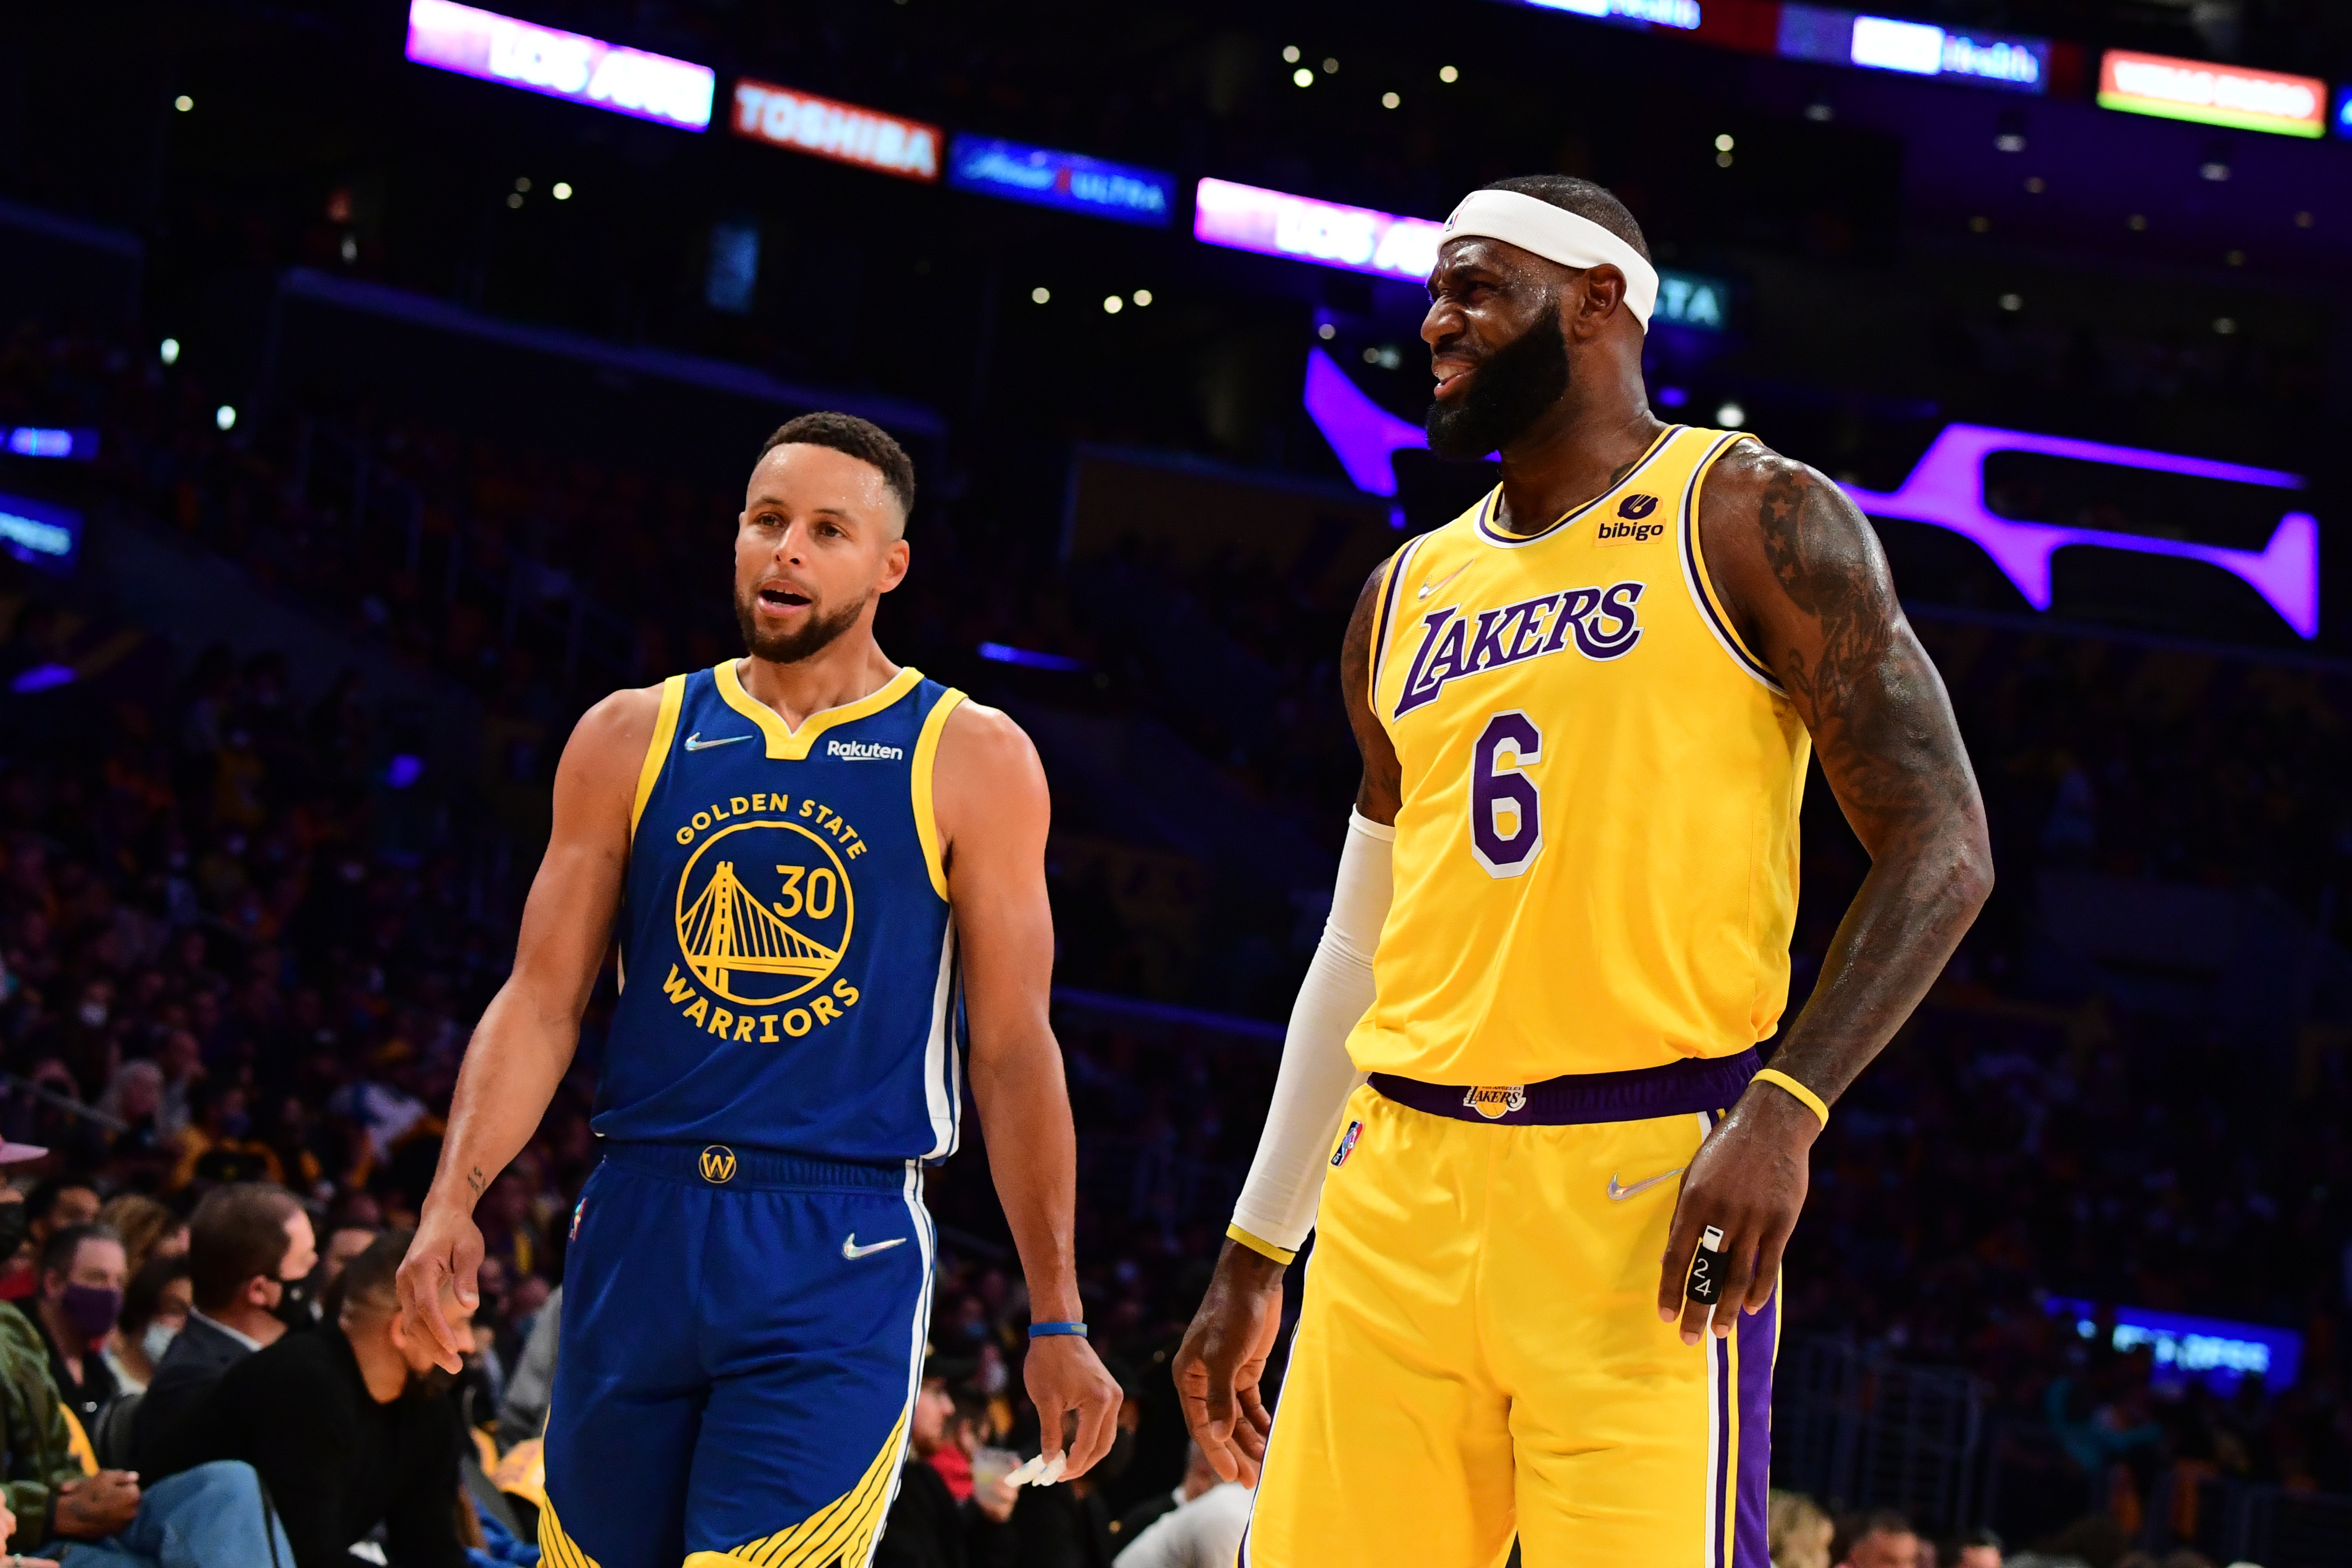 Golden State Warriors vs Los Angeles Lakers May 19, 2021 Game